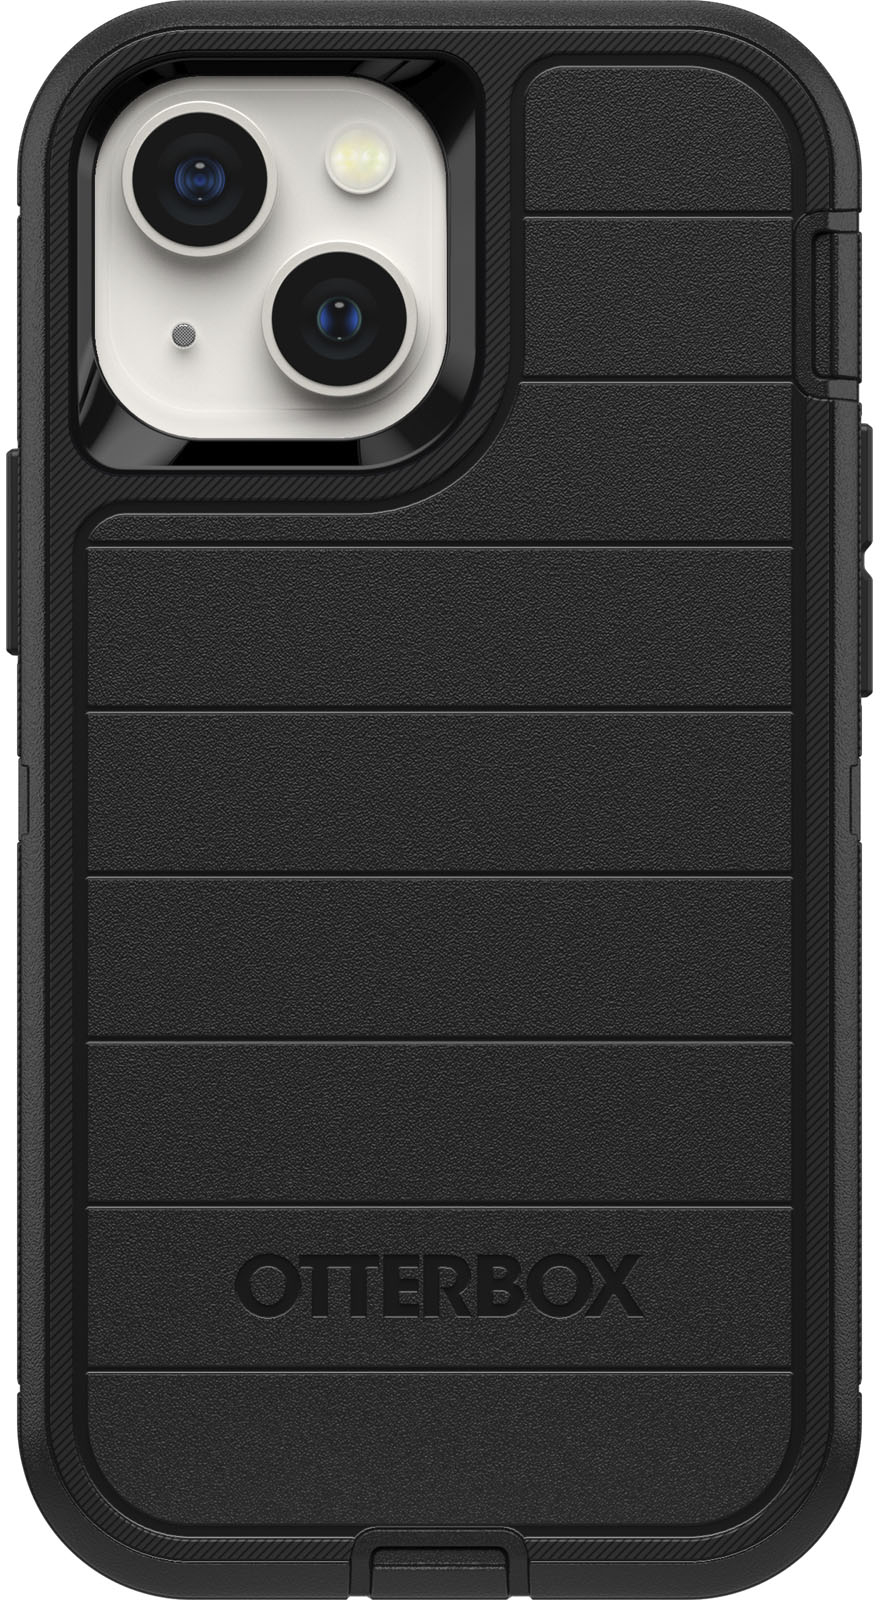 Questions and Answers OtterBox Defender Series Pro Hard Shell for